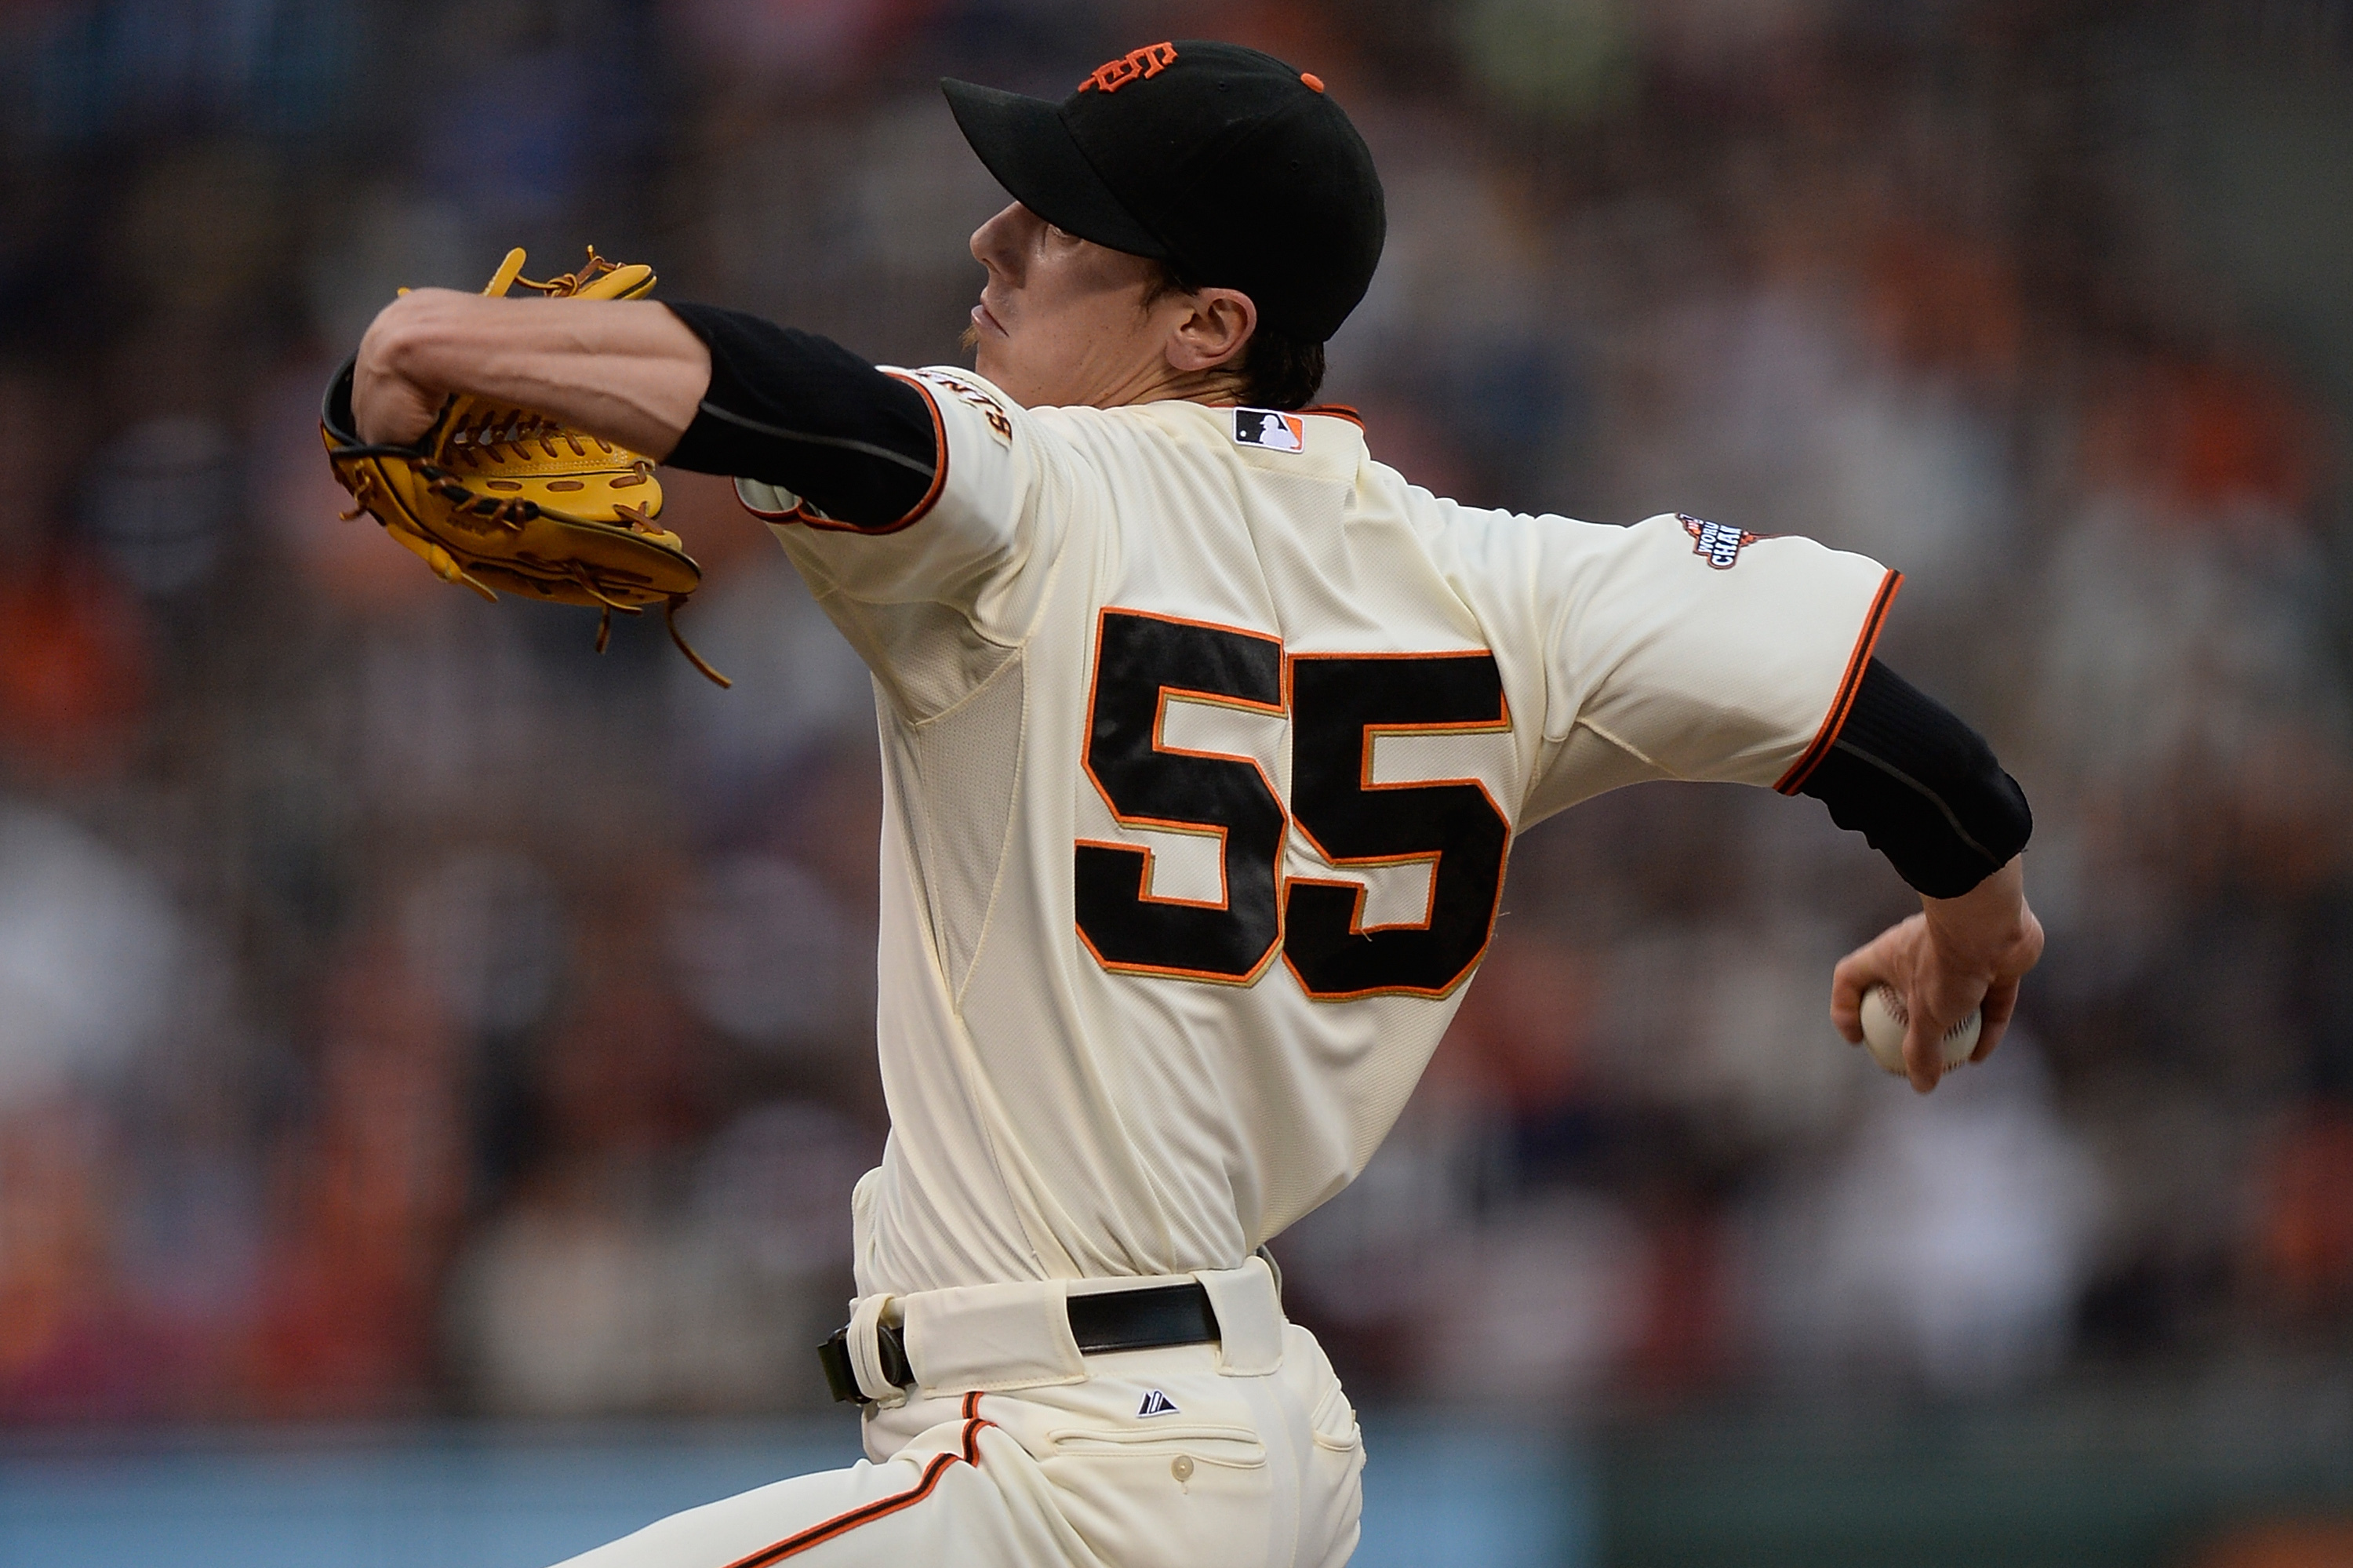 Lincecum No-Hits Padres for 2nd Time in 2 Seasons - The New York Times